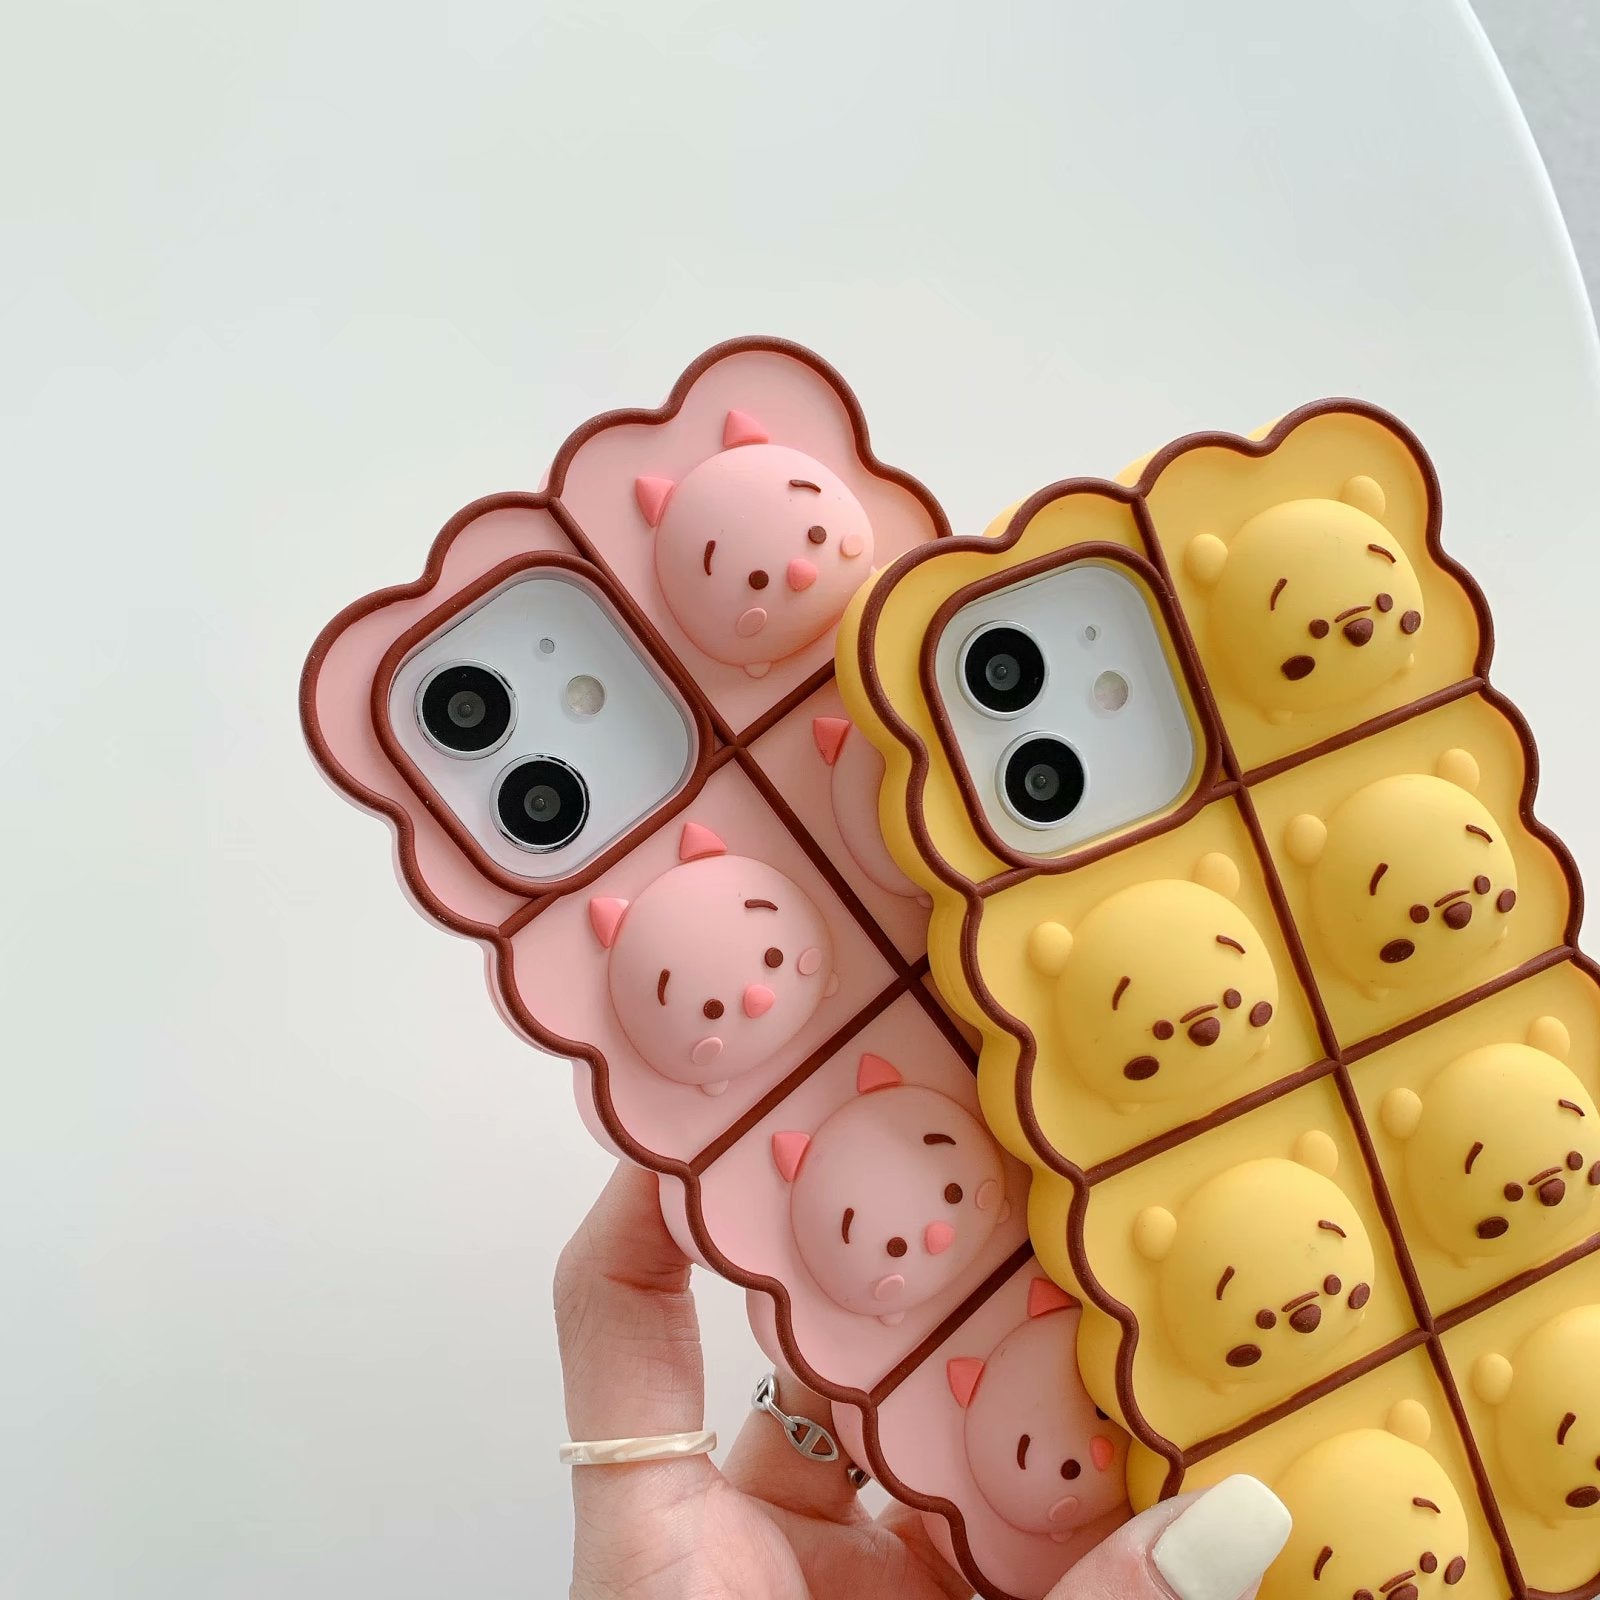 Cute animals case for iPhone